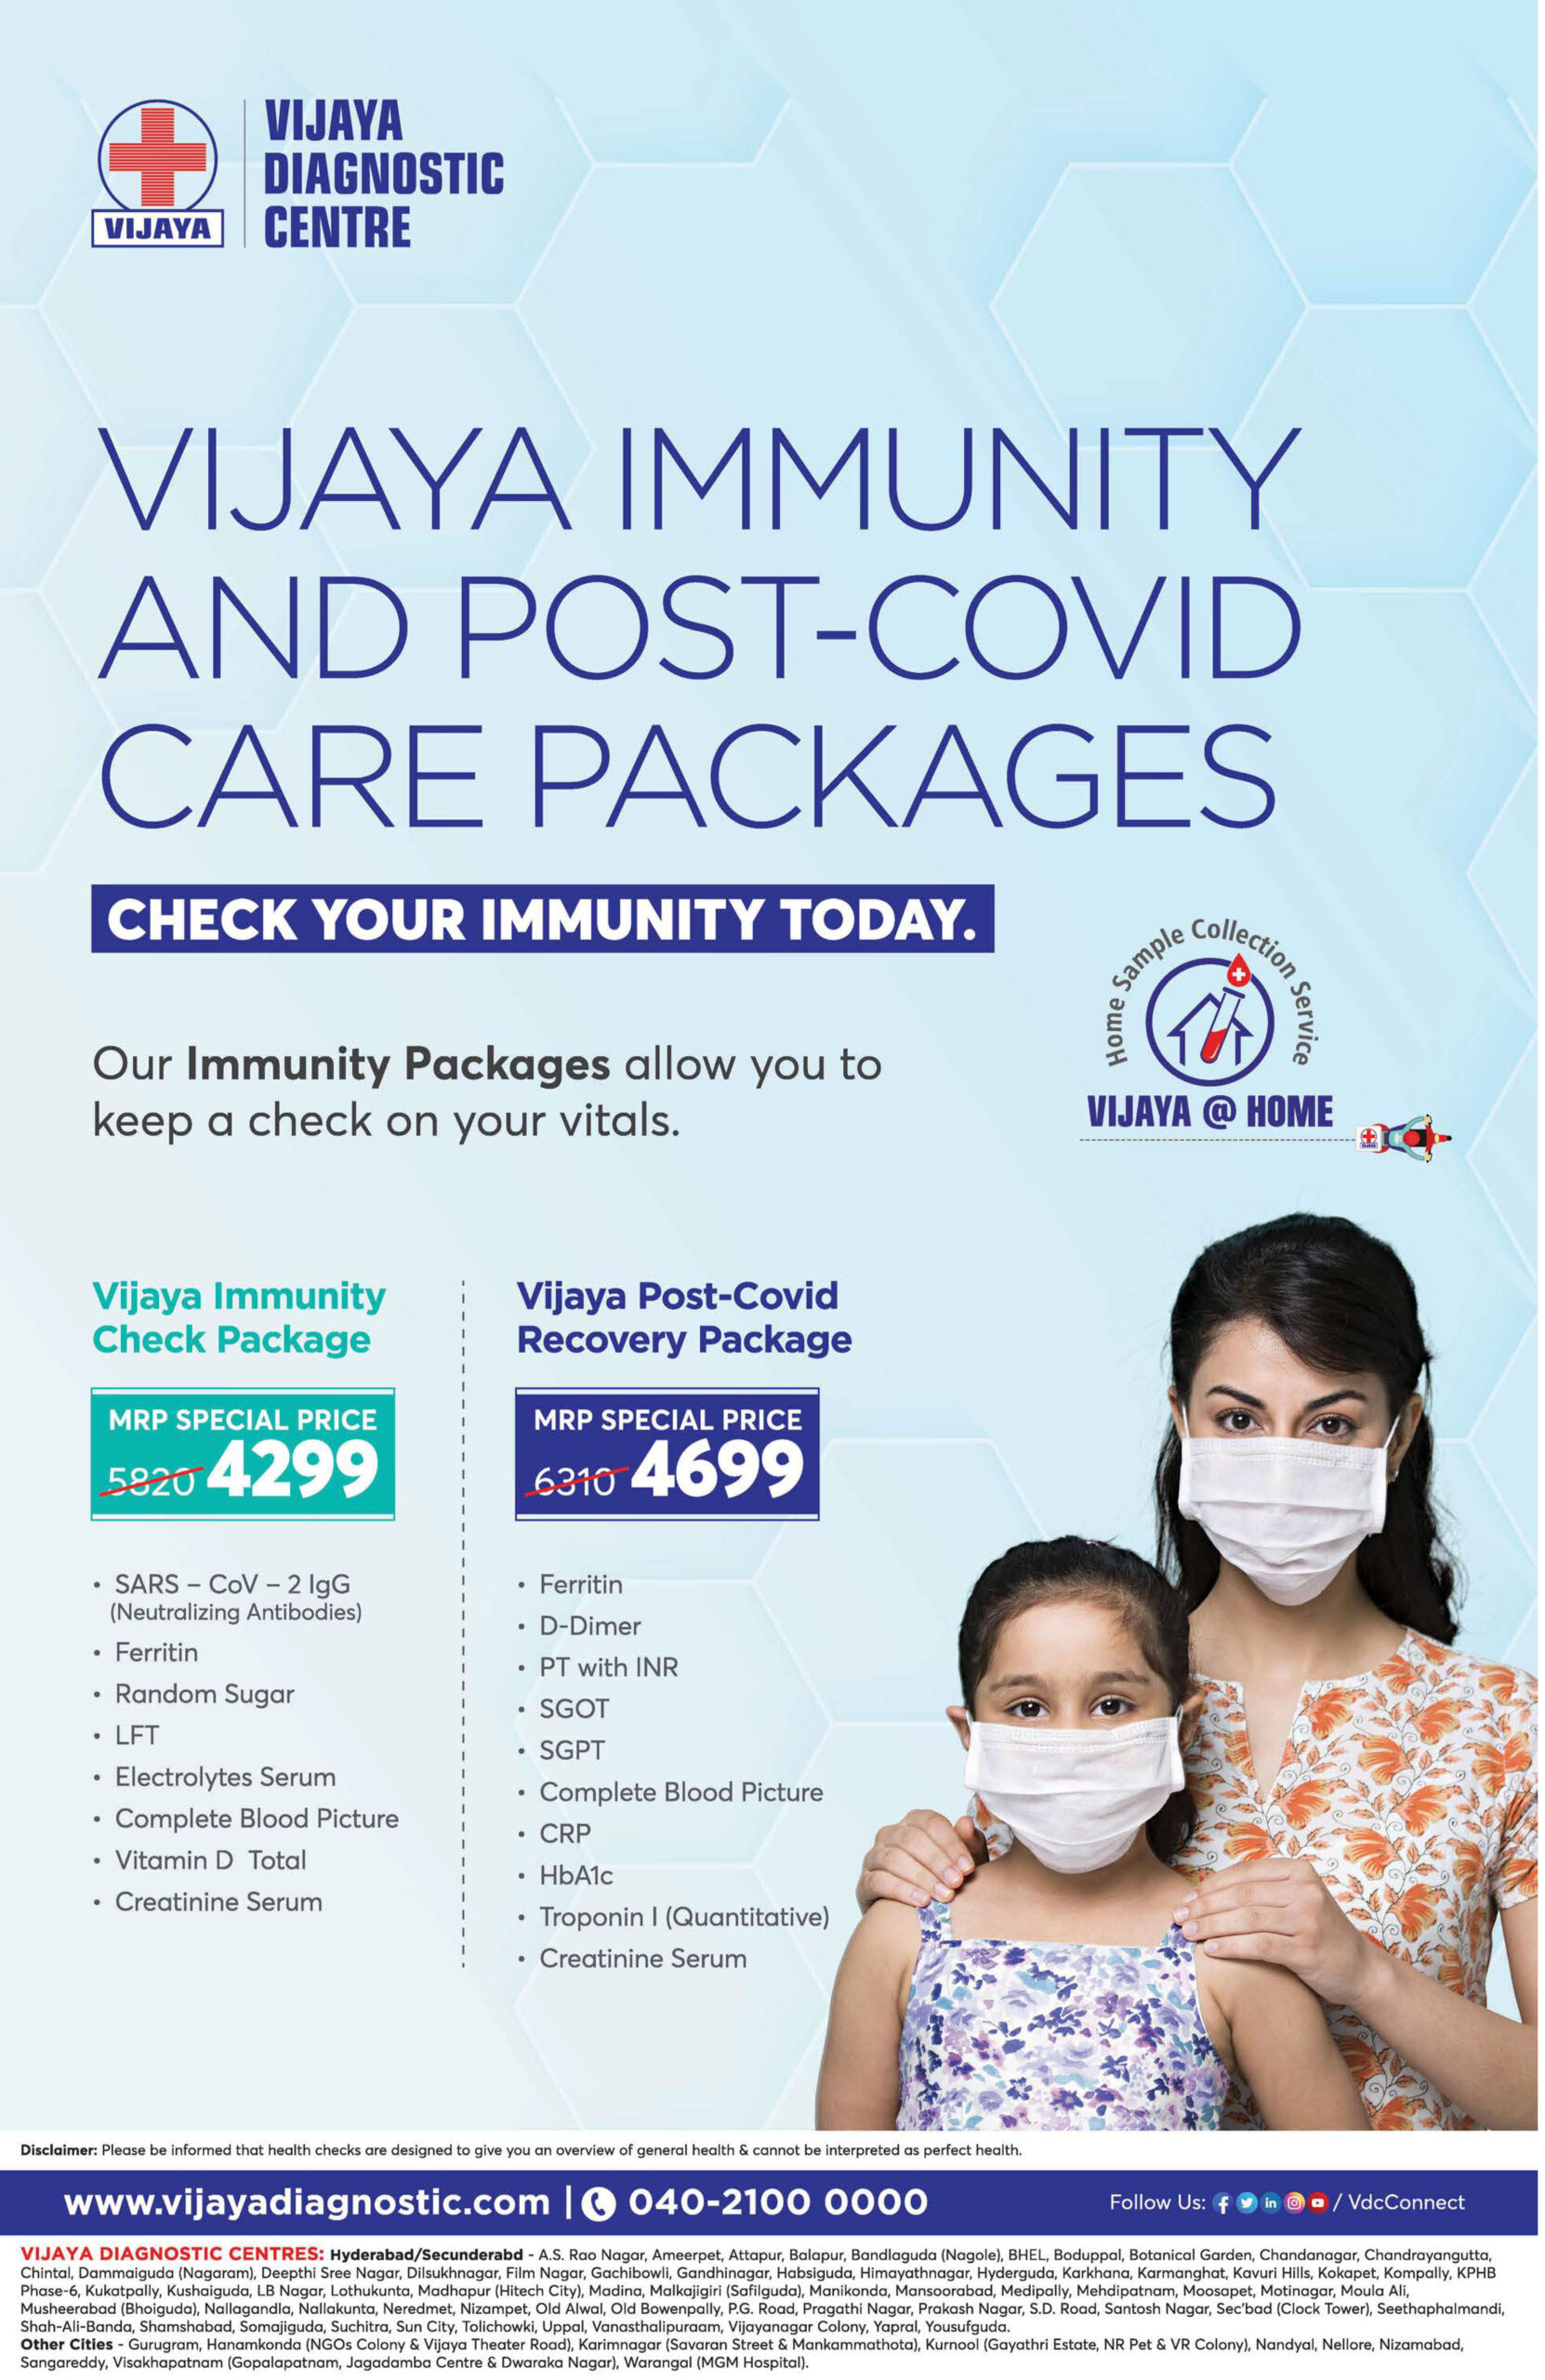 vijaya-diagnostic-centre-immunity-and-post-covid-care-packages-ad-deccan-chronicle-hyderabad-7-7-2021